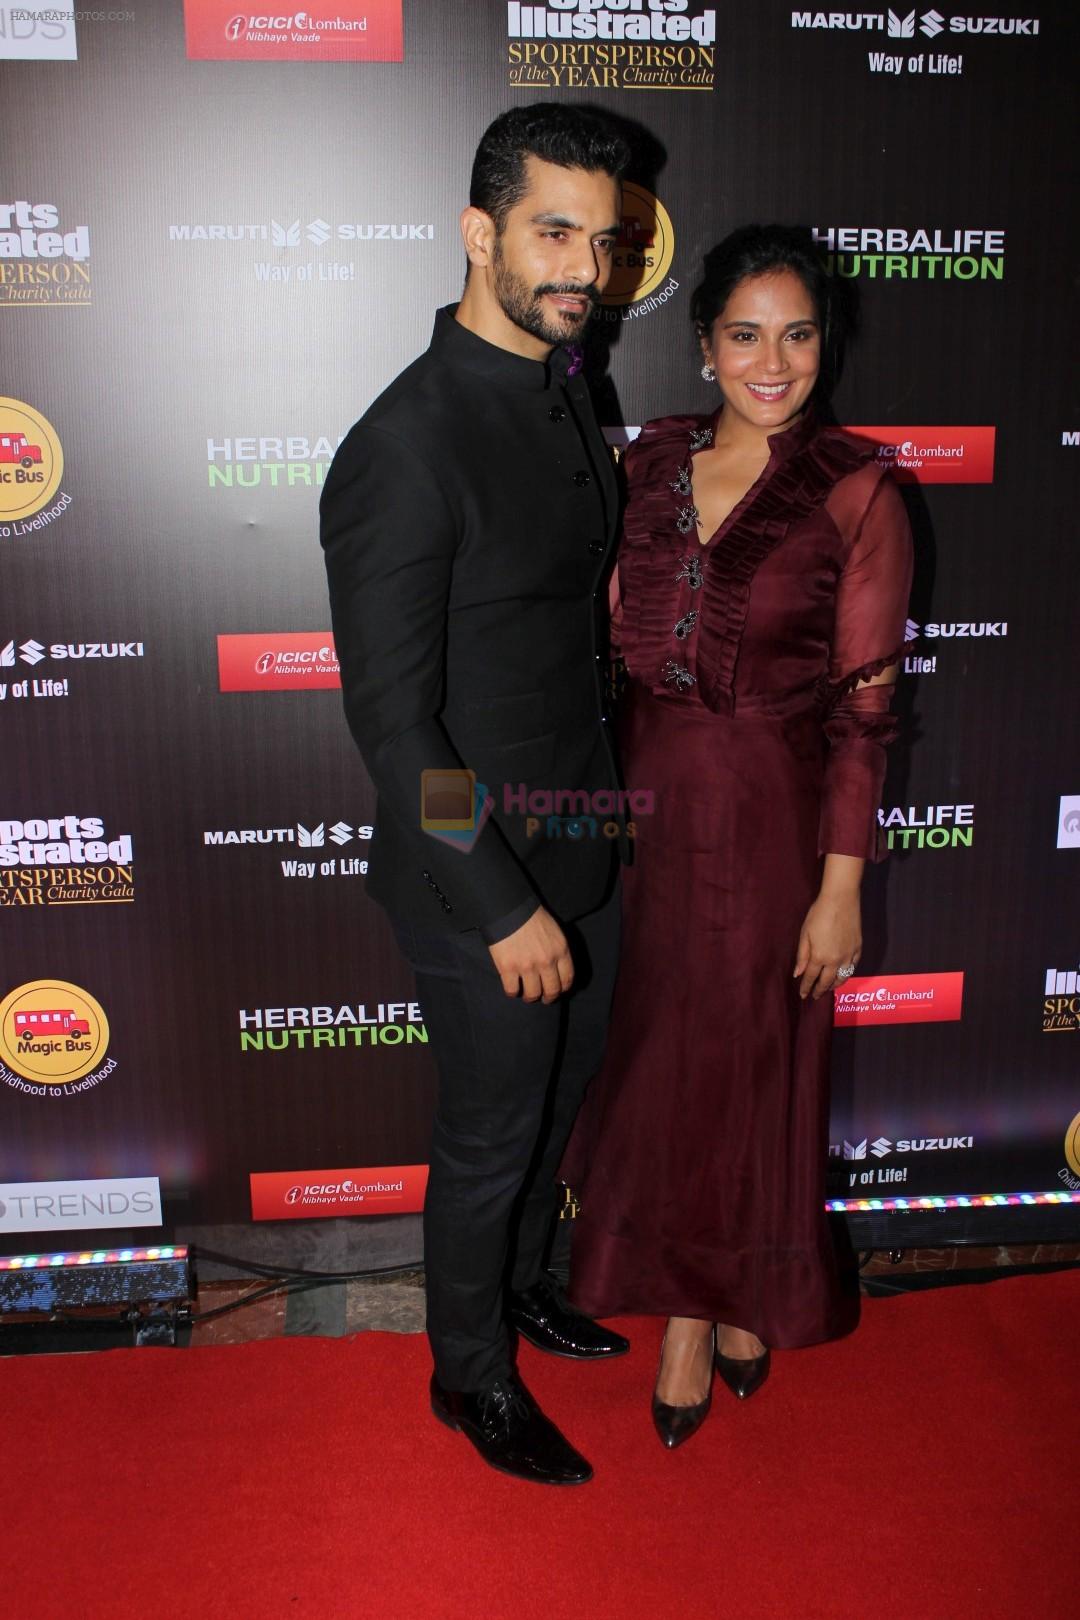 Richa Chadda, Angad Bedi at The 6th Edition Of SportsPerson Of The Year Awards 2017 on 7th July 2017